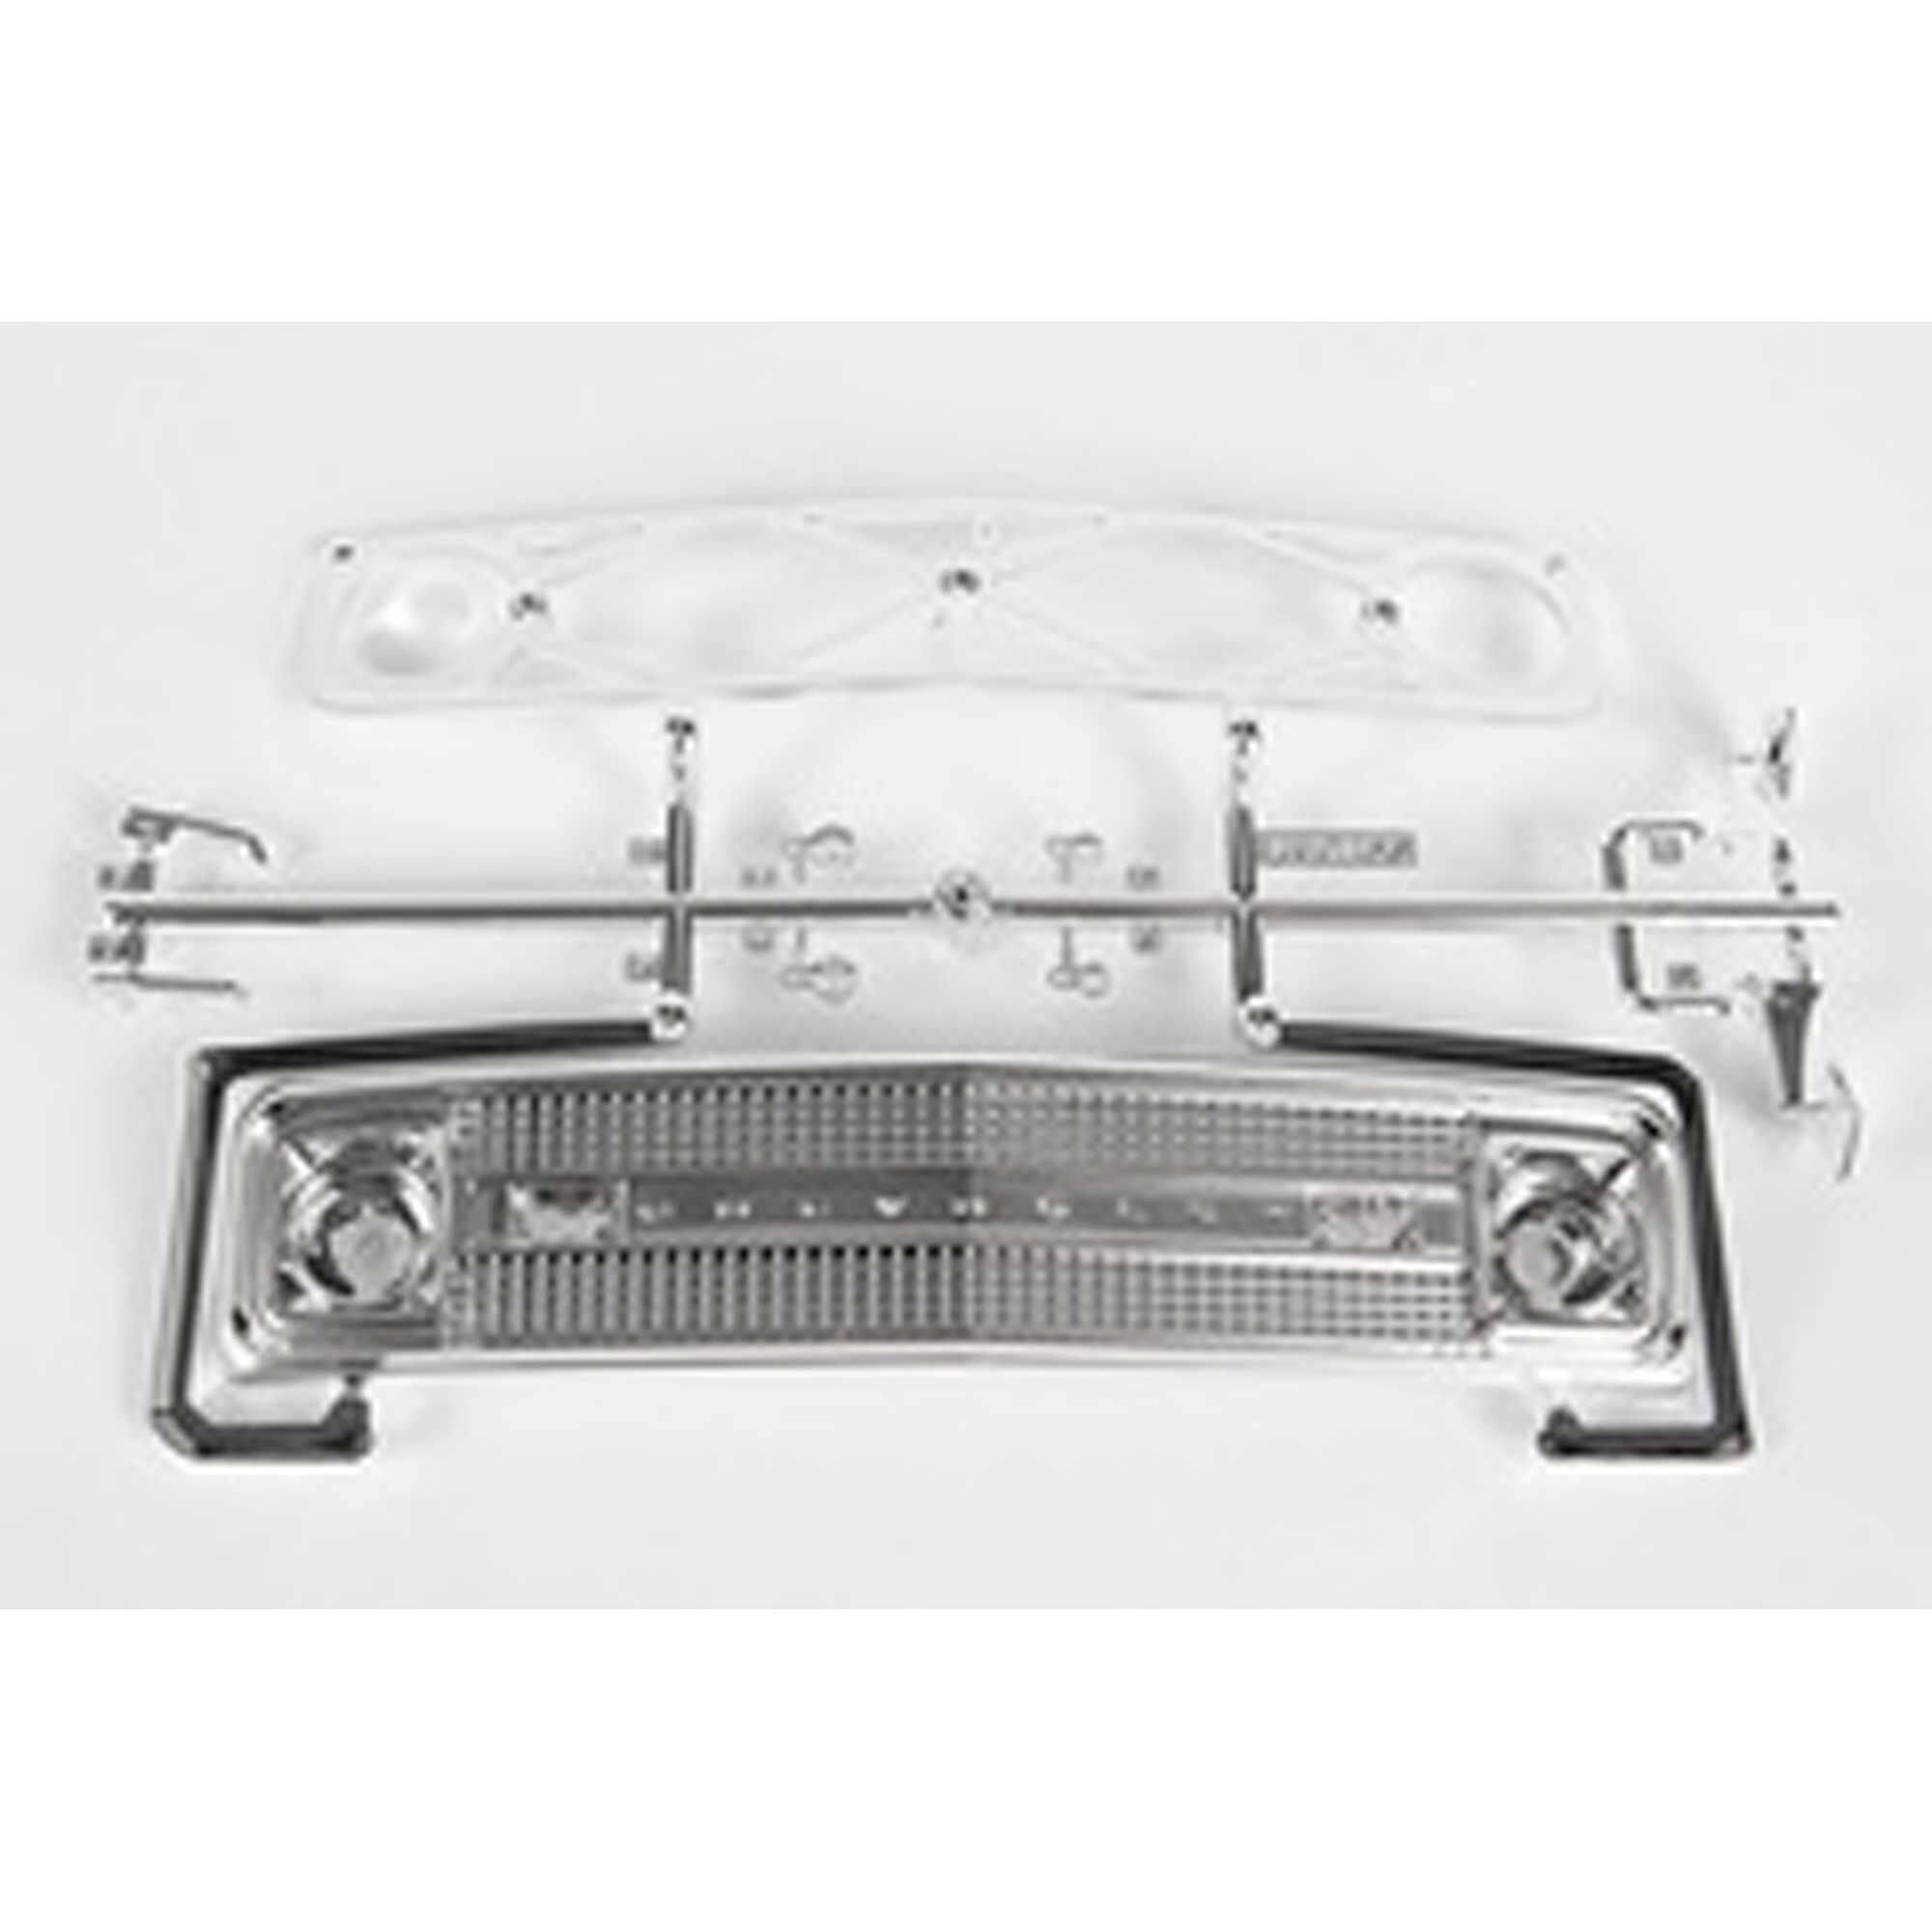 Axial 1969 Chevy K5 Blazer Grille and Body Details, AX31549